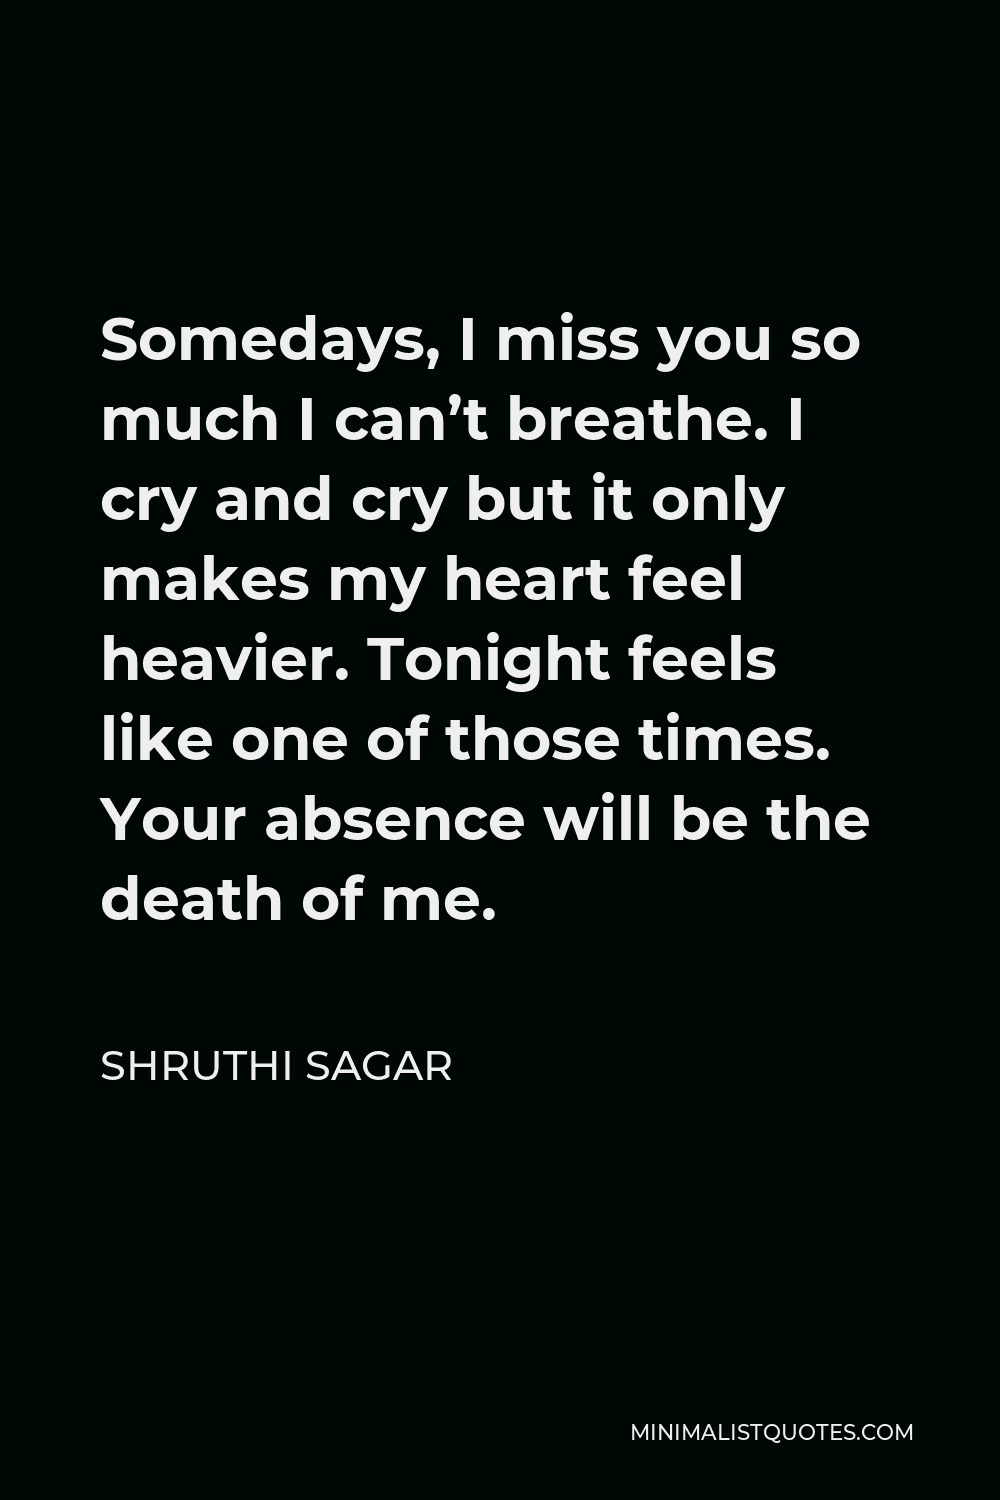 Shruthi Sagar Quote: Somedays, I miss you so much I can't breathe ...